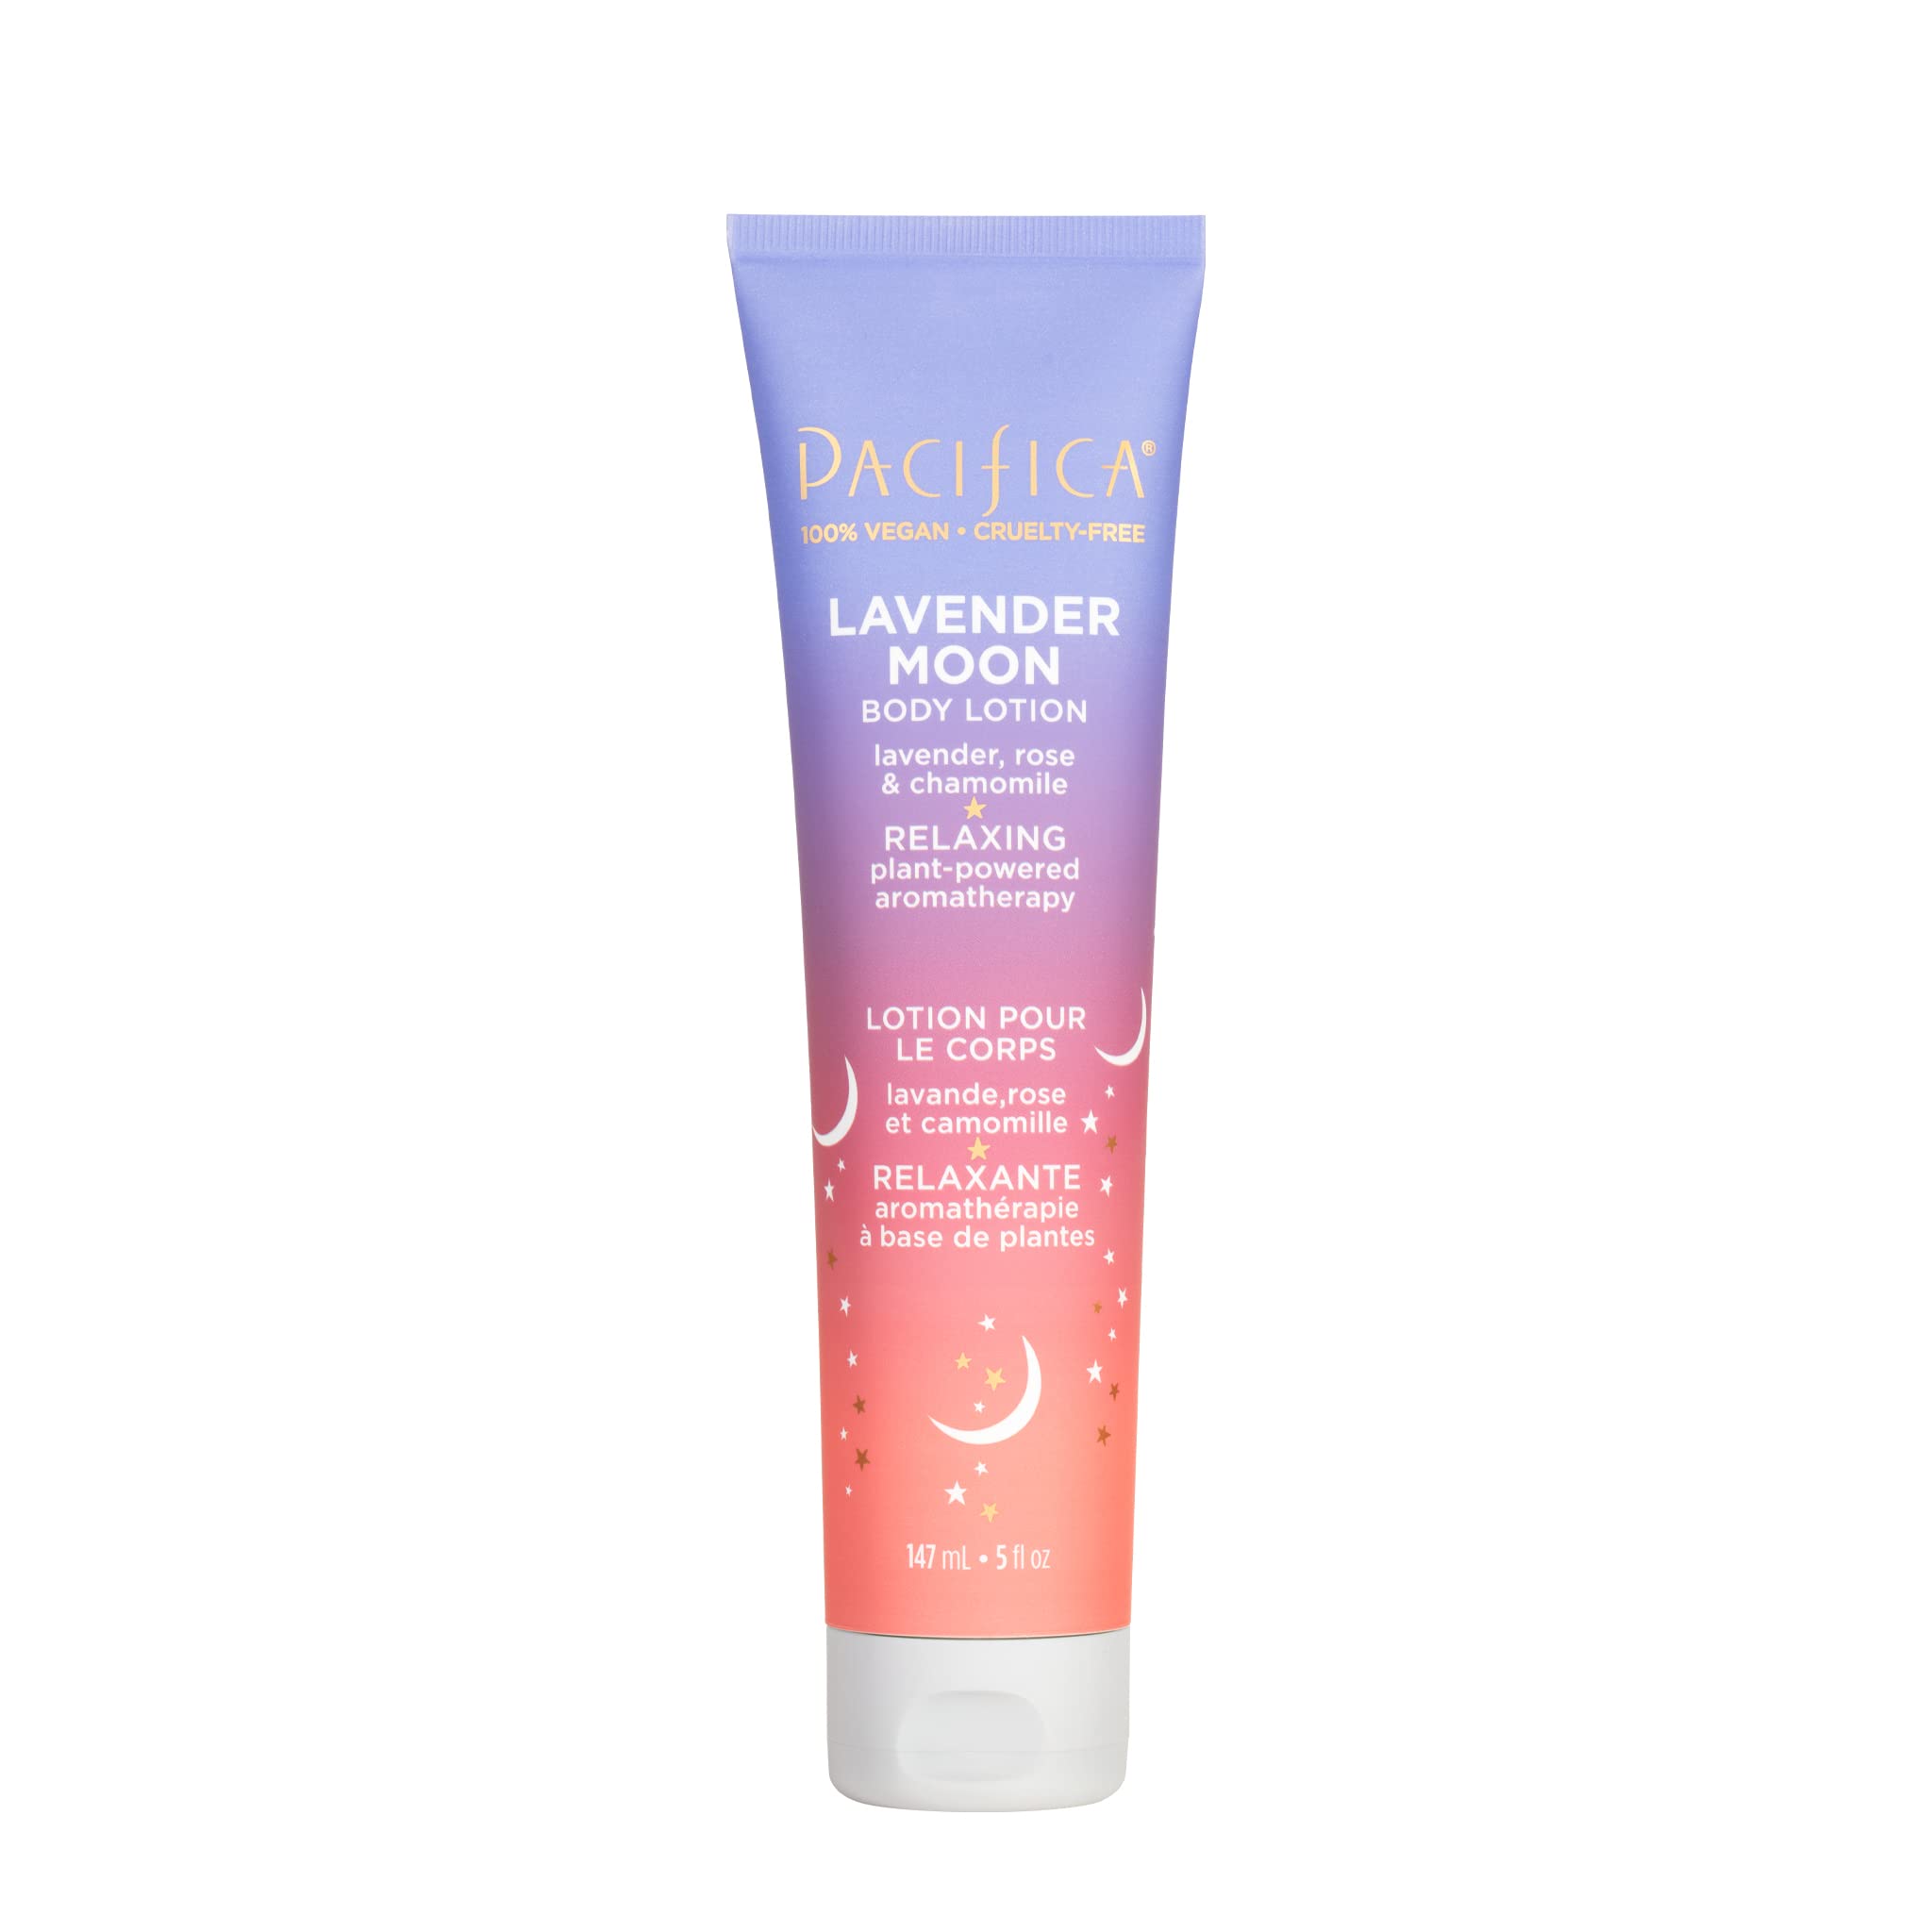 5-Oz Pacifica Relaxing Body Lotion (Lavender Moon) $3.43 w/ S&S + Free Shipping w/ Prime or on $35+